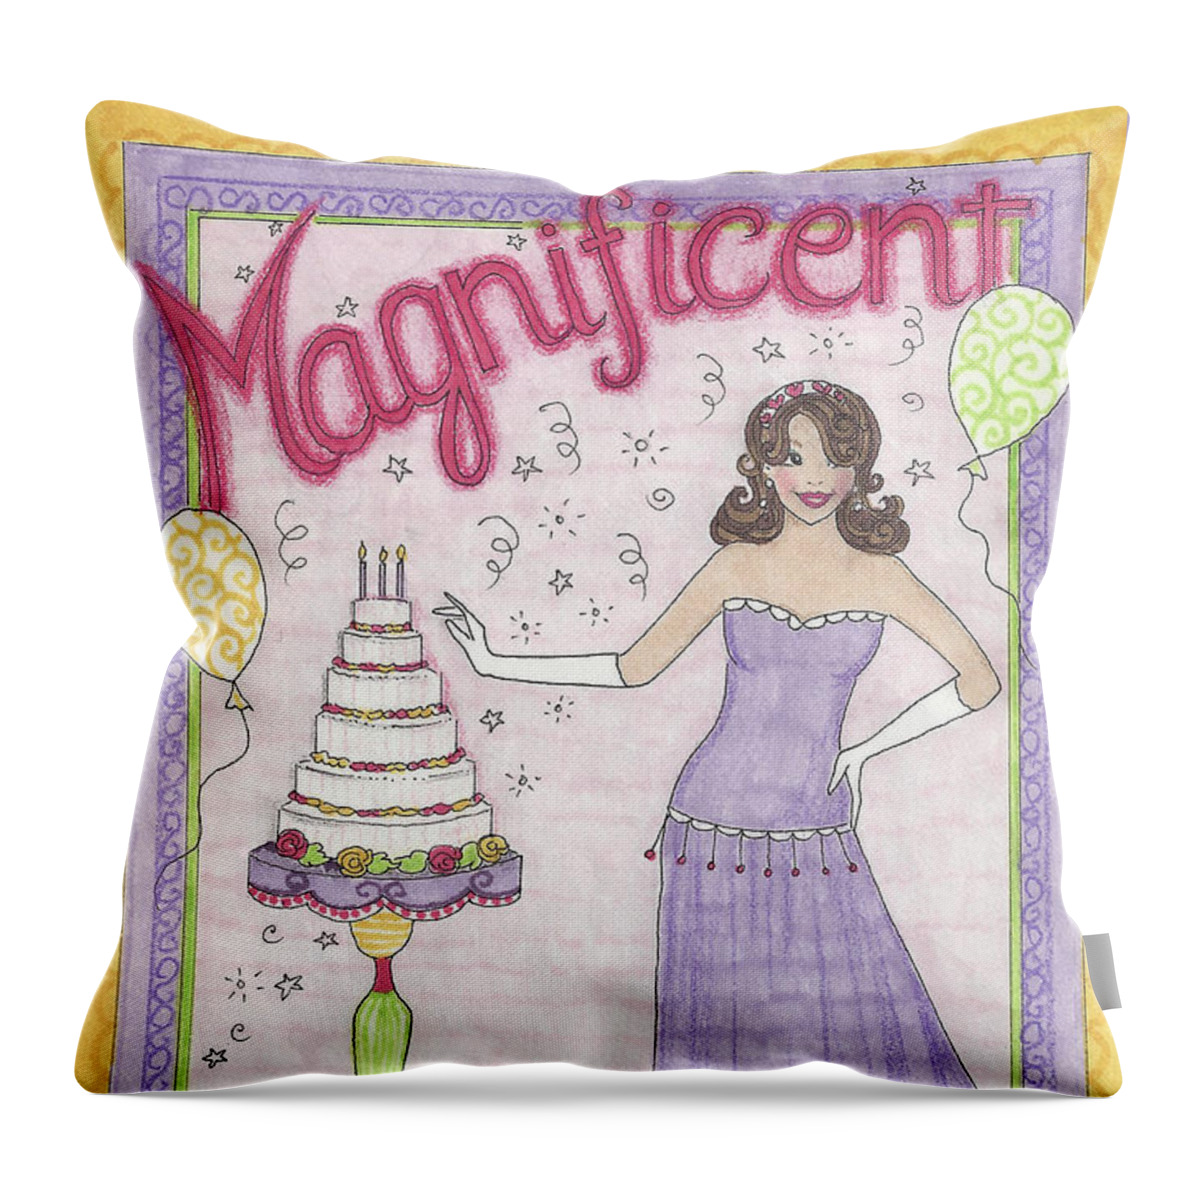 Magnificent Throw Pillow featuring the mixed media Magnificent by Stephanie Hessler